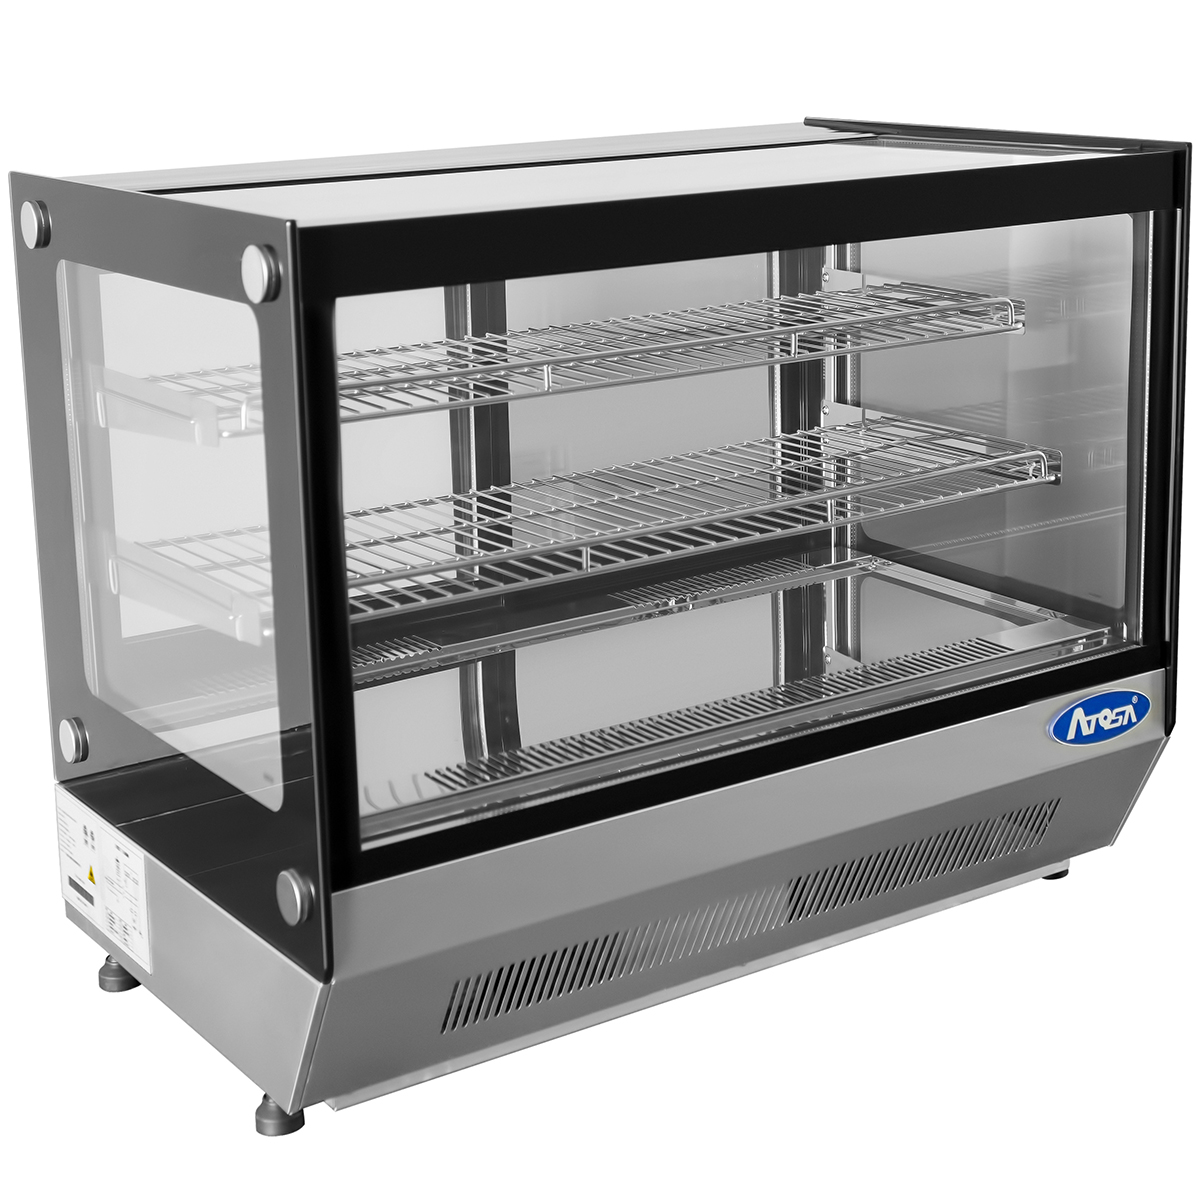 Atosa CRDS-42 Refrigerated Countertop Display Case, 4.2 Cu. Ft., Flat Glass - 27-3/5"W x 22-1/10"D x 26-2/5"H image 1